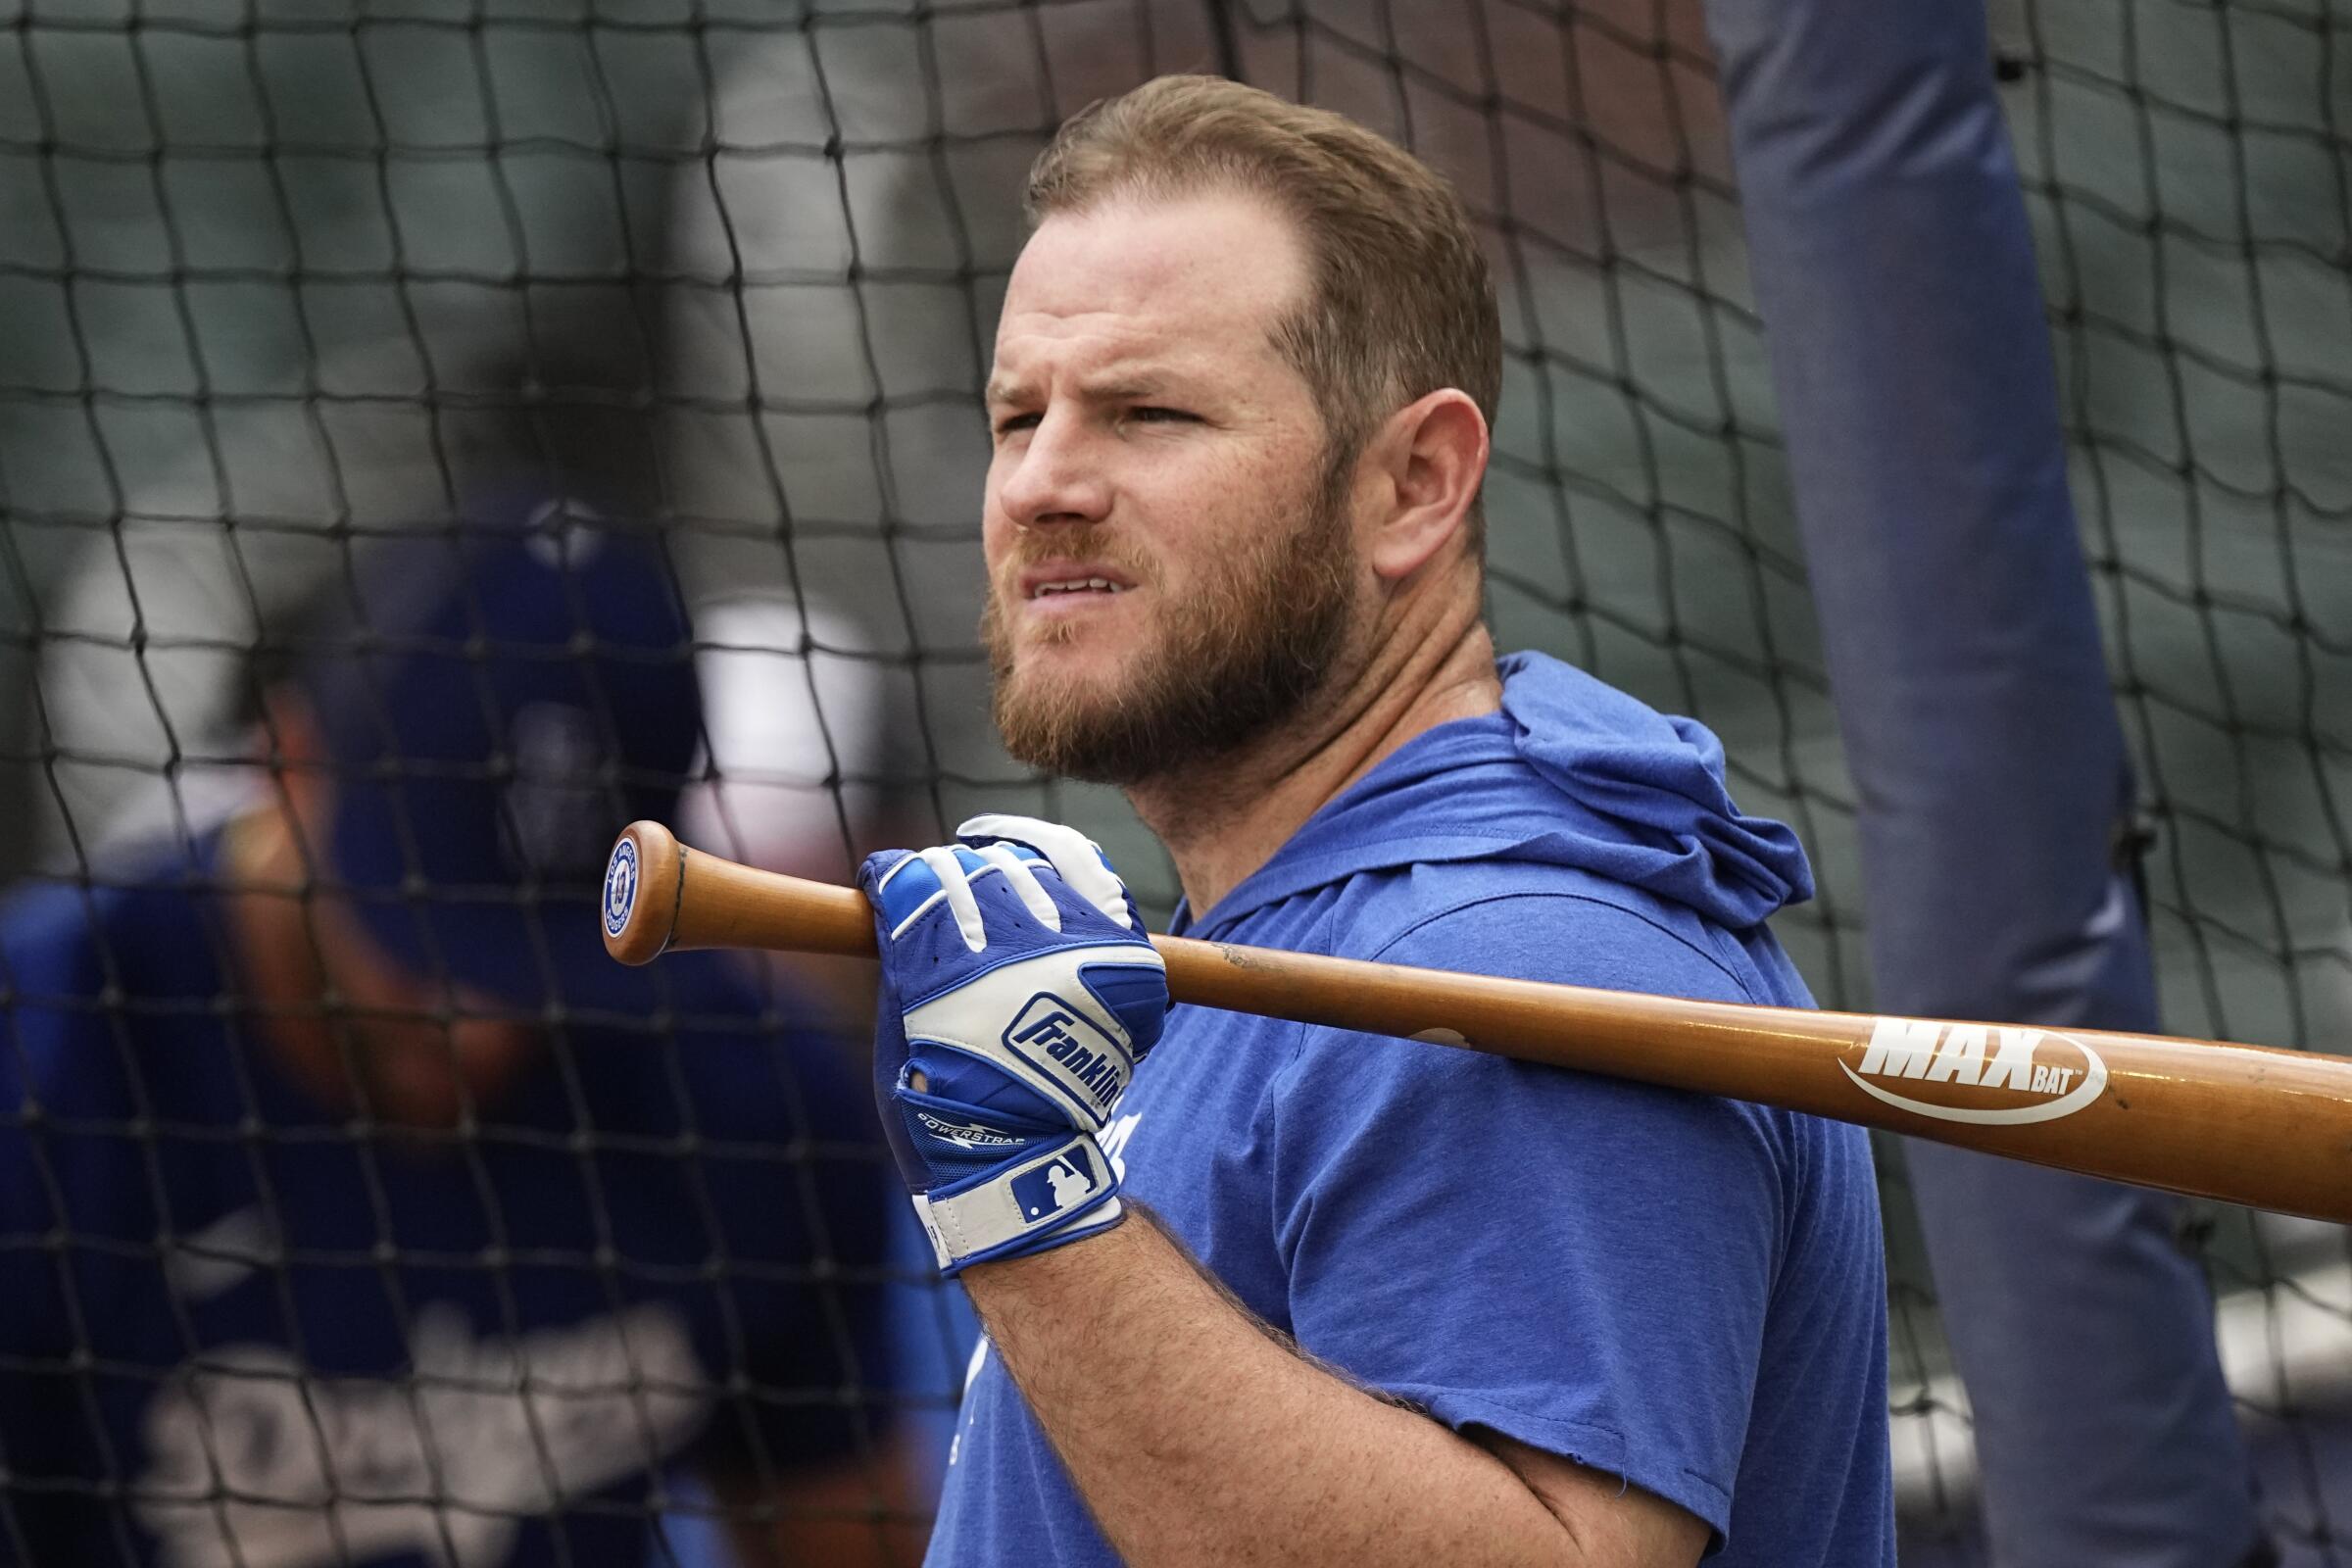 Max Muncy of the Dodgers holds a bat over his shoulder while waiting for batting practice at Truist Park in Atlanta.